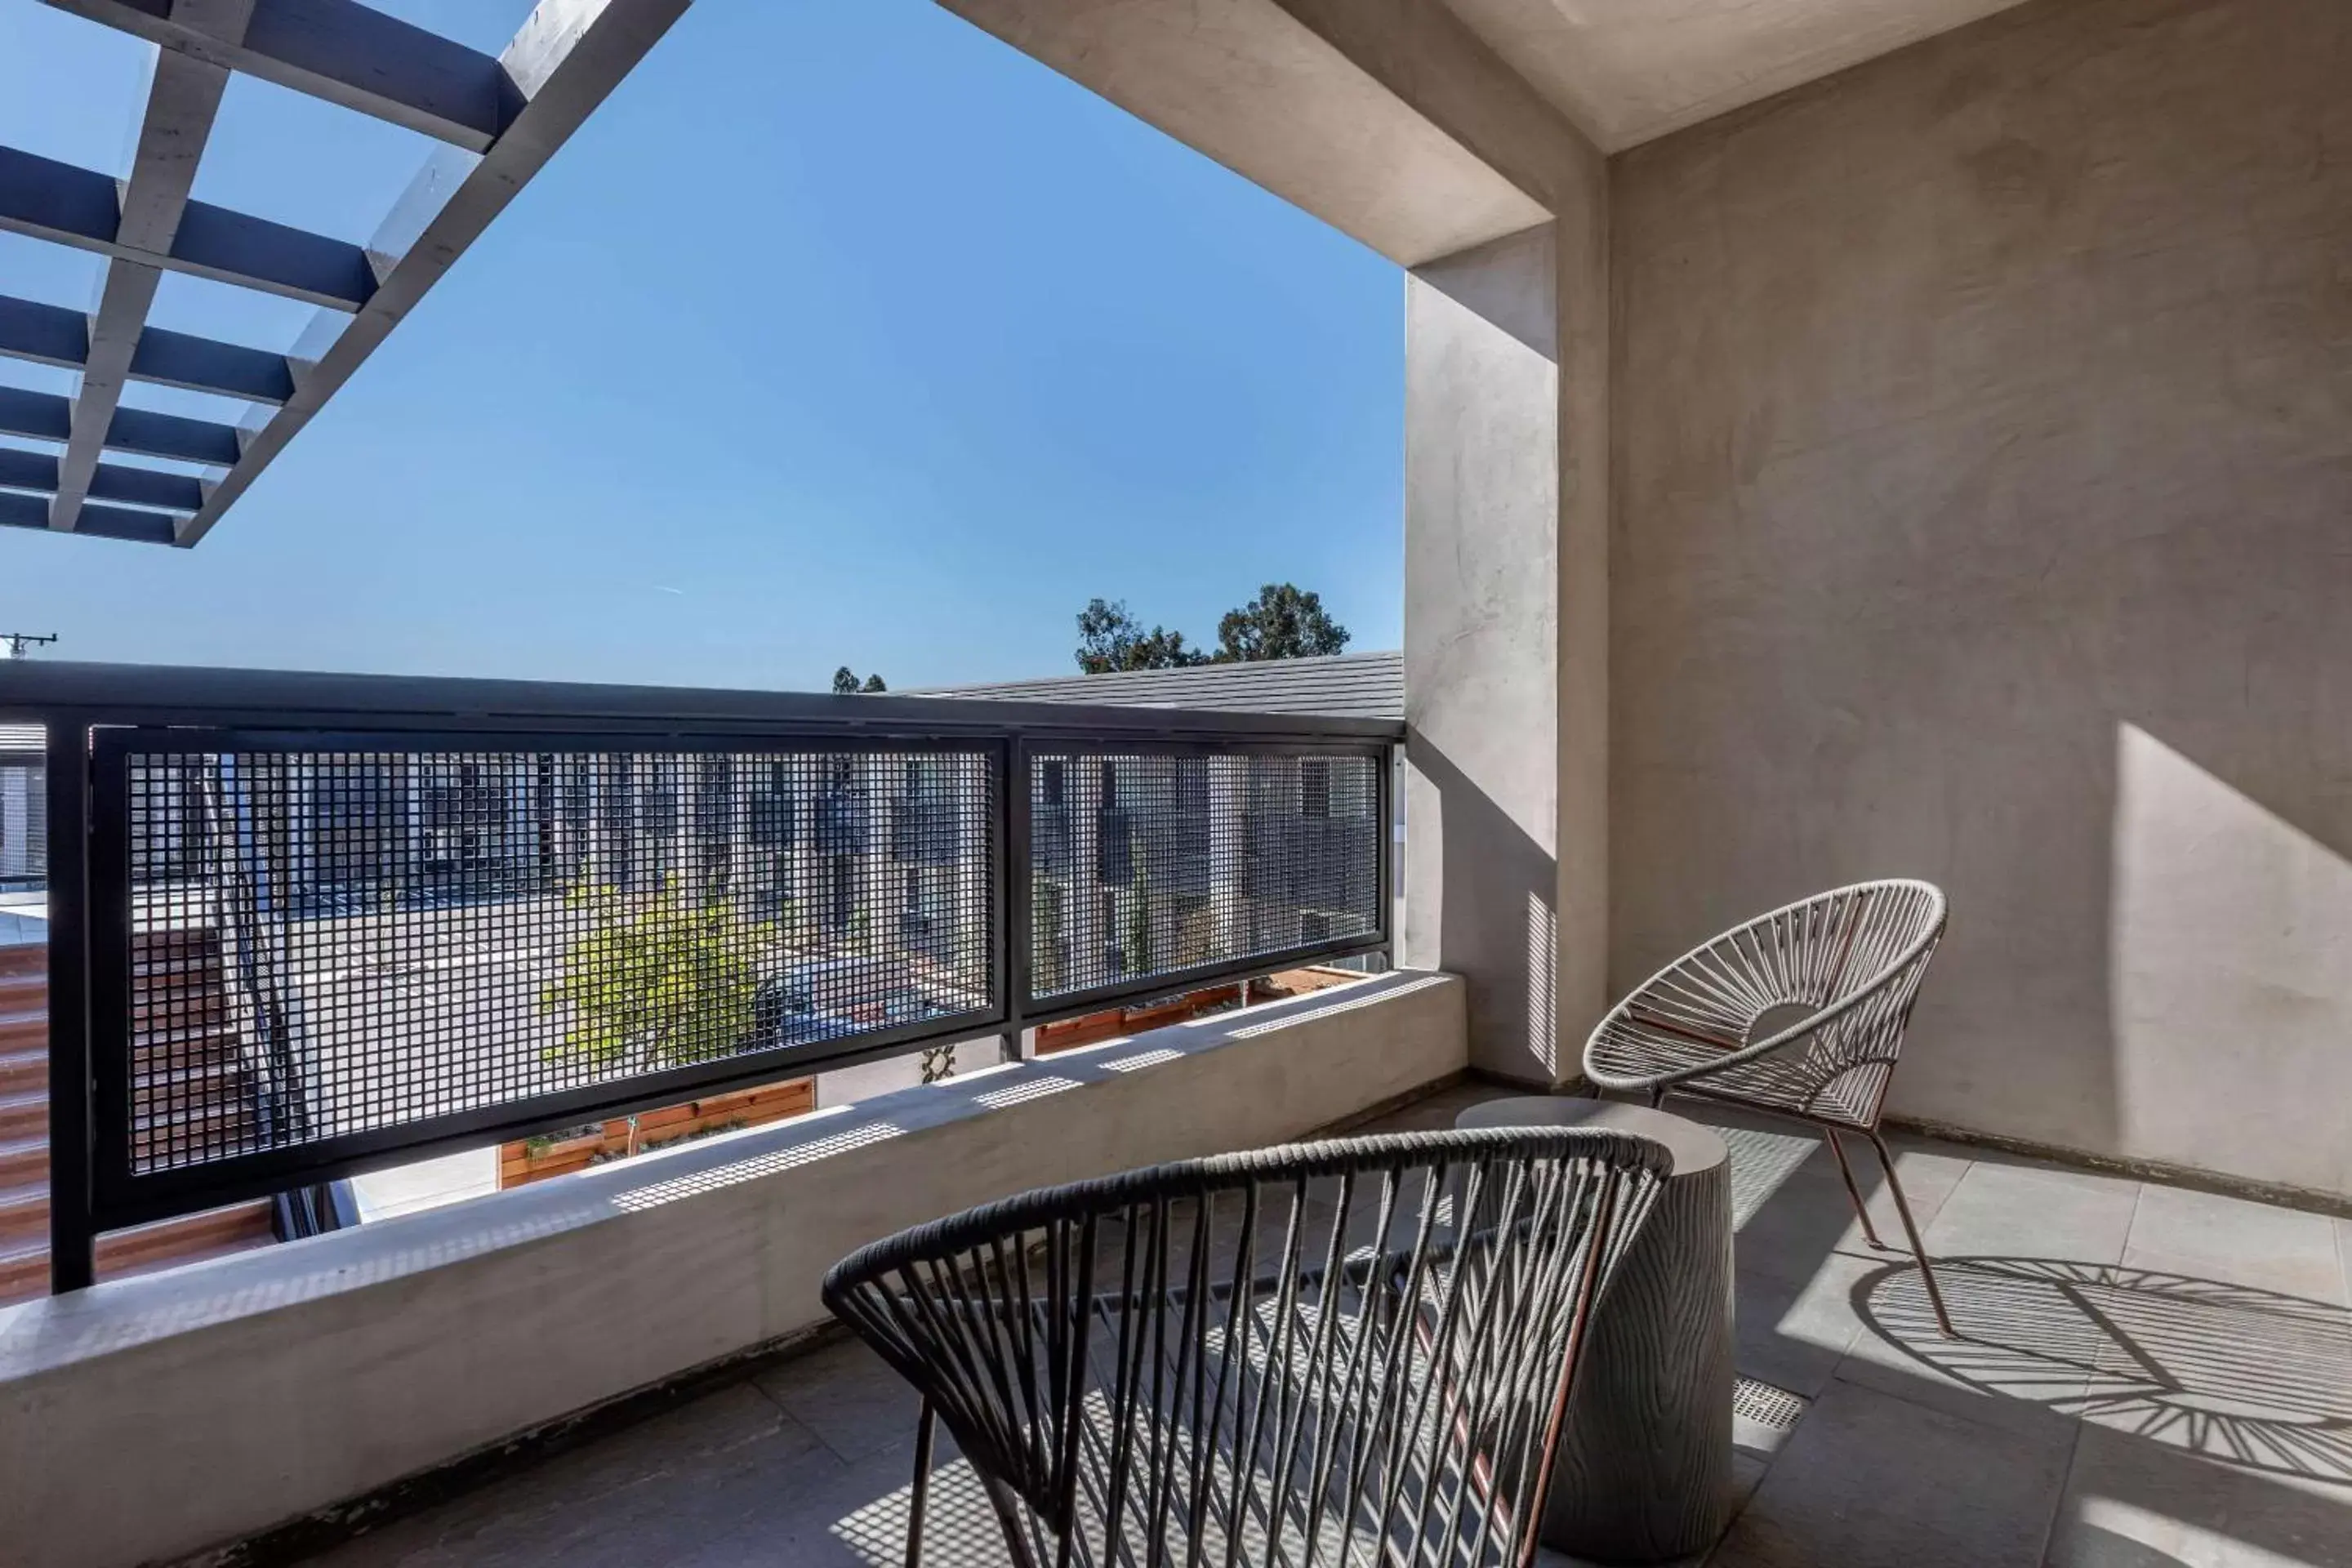 Balcony/Terrace in Bluestem Hotel Torrance Los Angeles, Ascend Hotel Collection